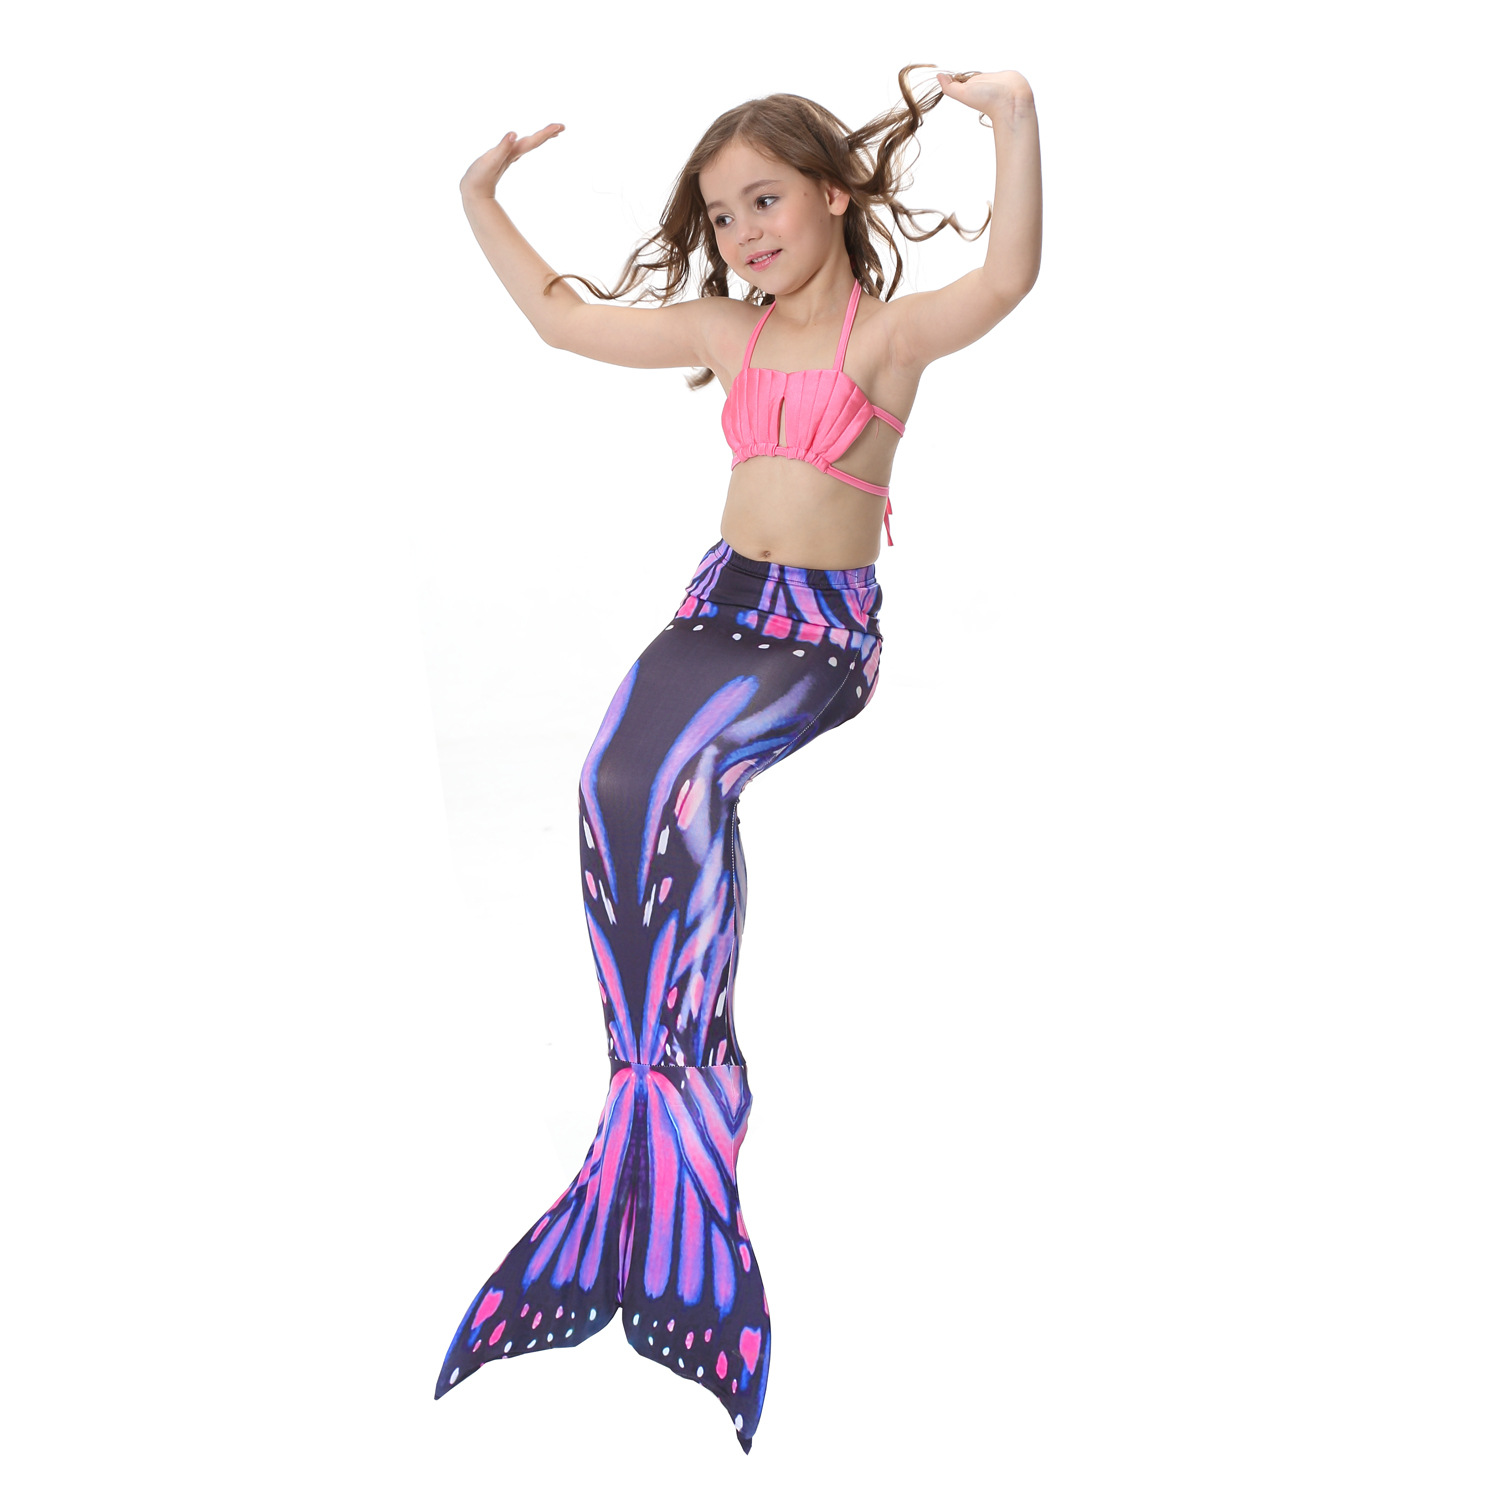 Fun-Mermaid-Tails-Swimming-Clothes-Gift-Best-Cosplay-Princess-Doll-Party-Dress-Gown-Skirts-1298569-8